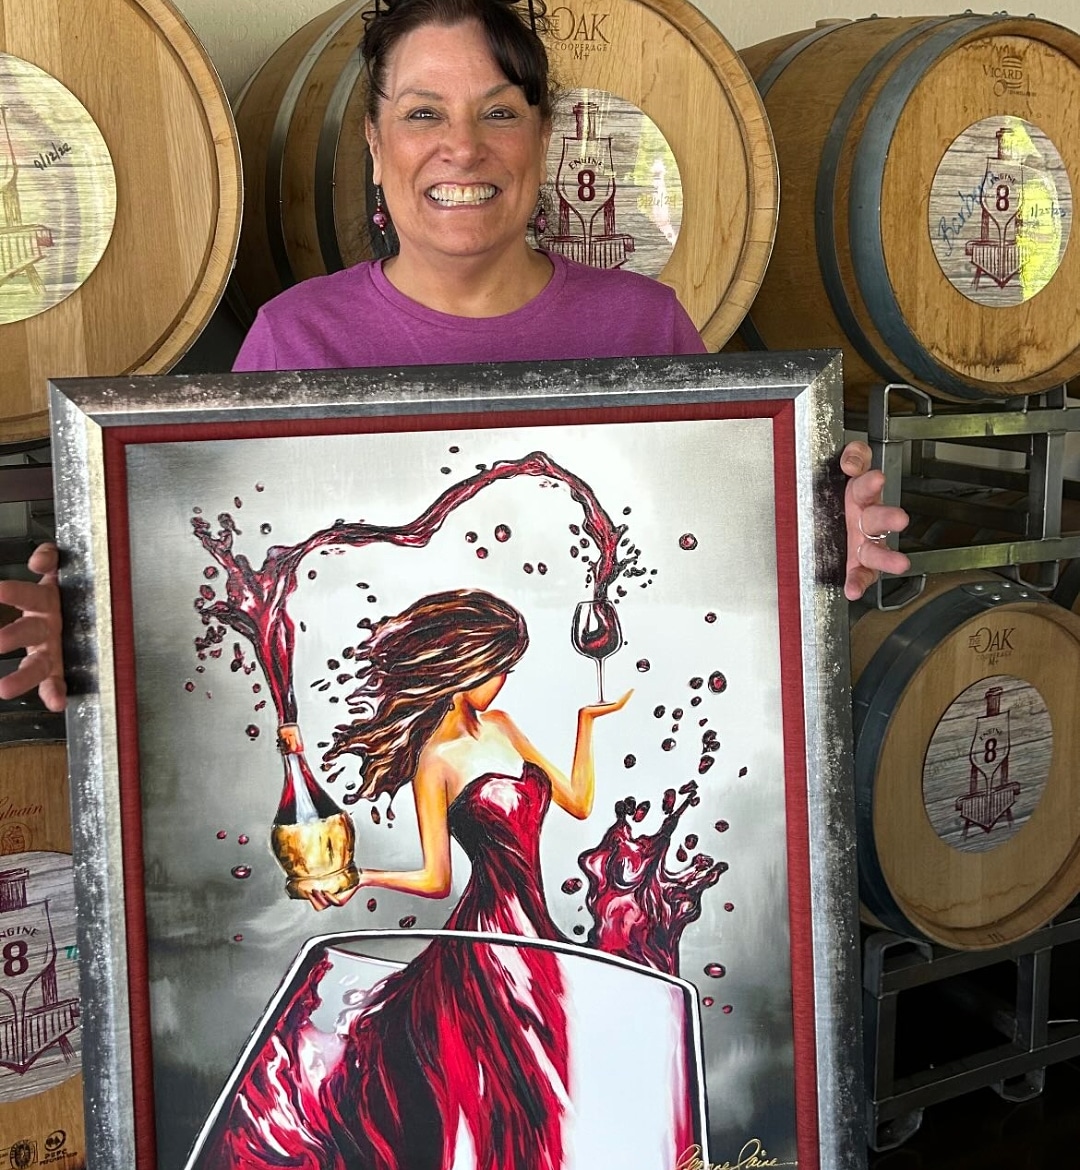 My #winart 'Casting Chianti' purchased and framed, at Engine 8 #Winery (find this #wine #art in many sizes leannelainefineart.com) #wineartist #winetasting